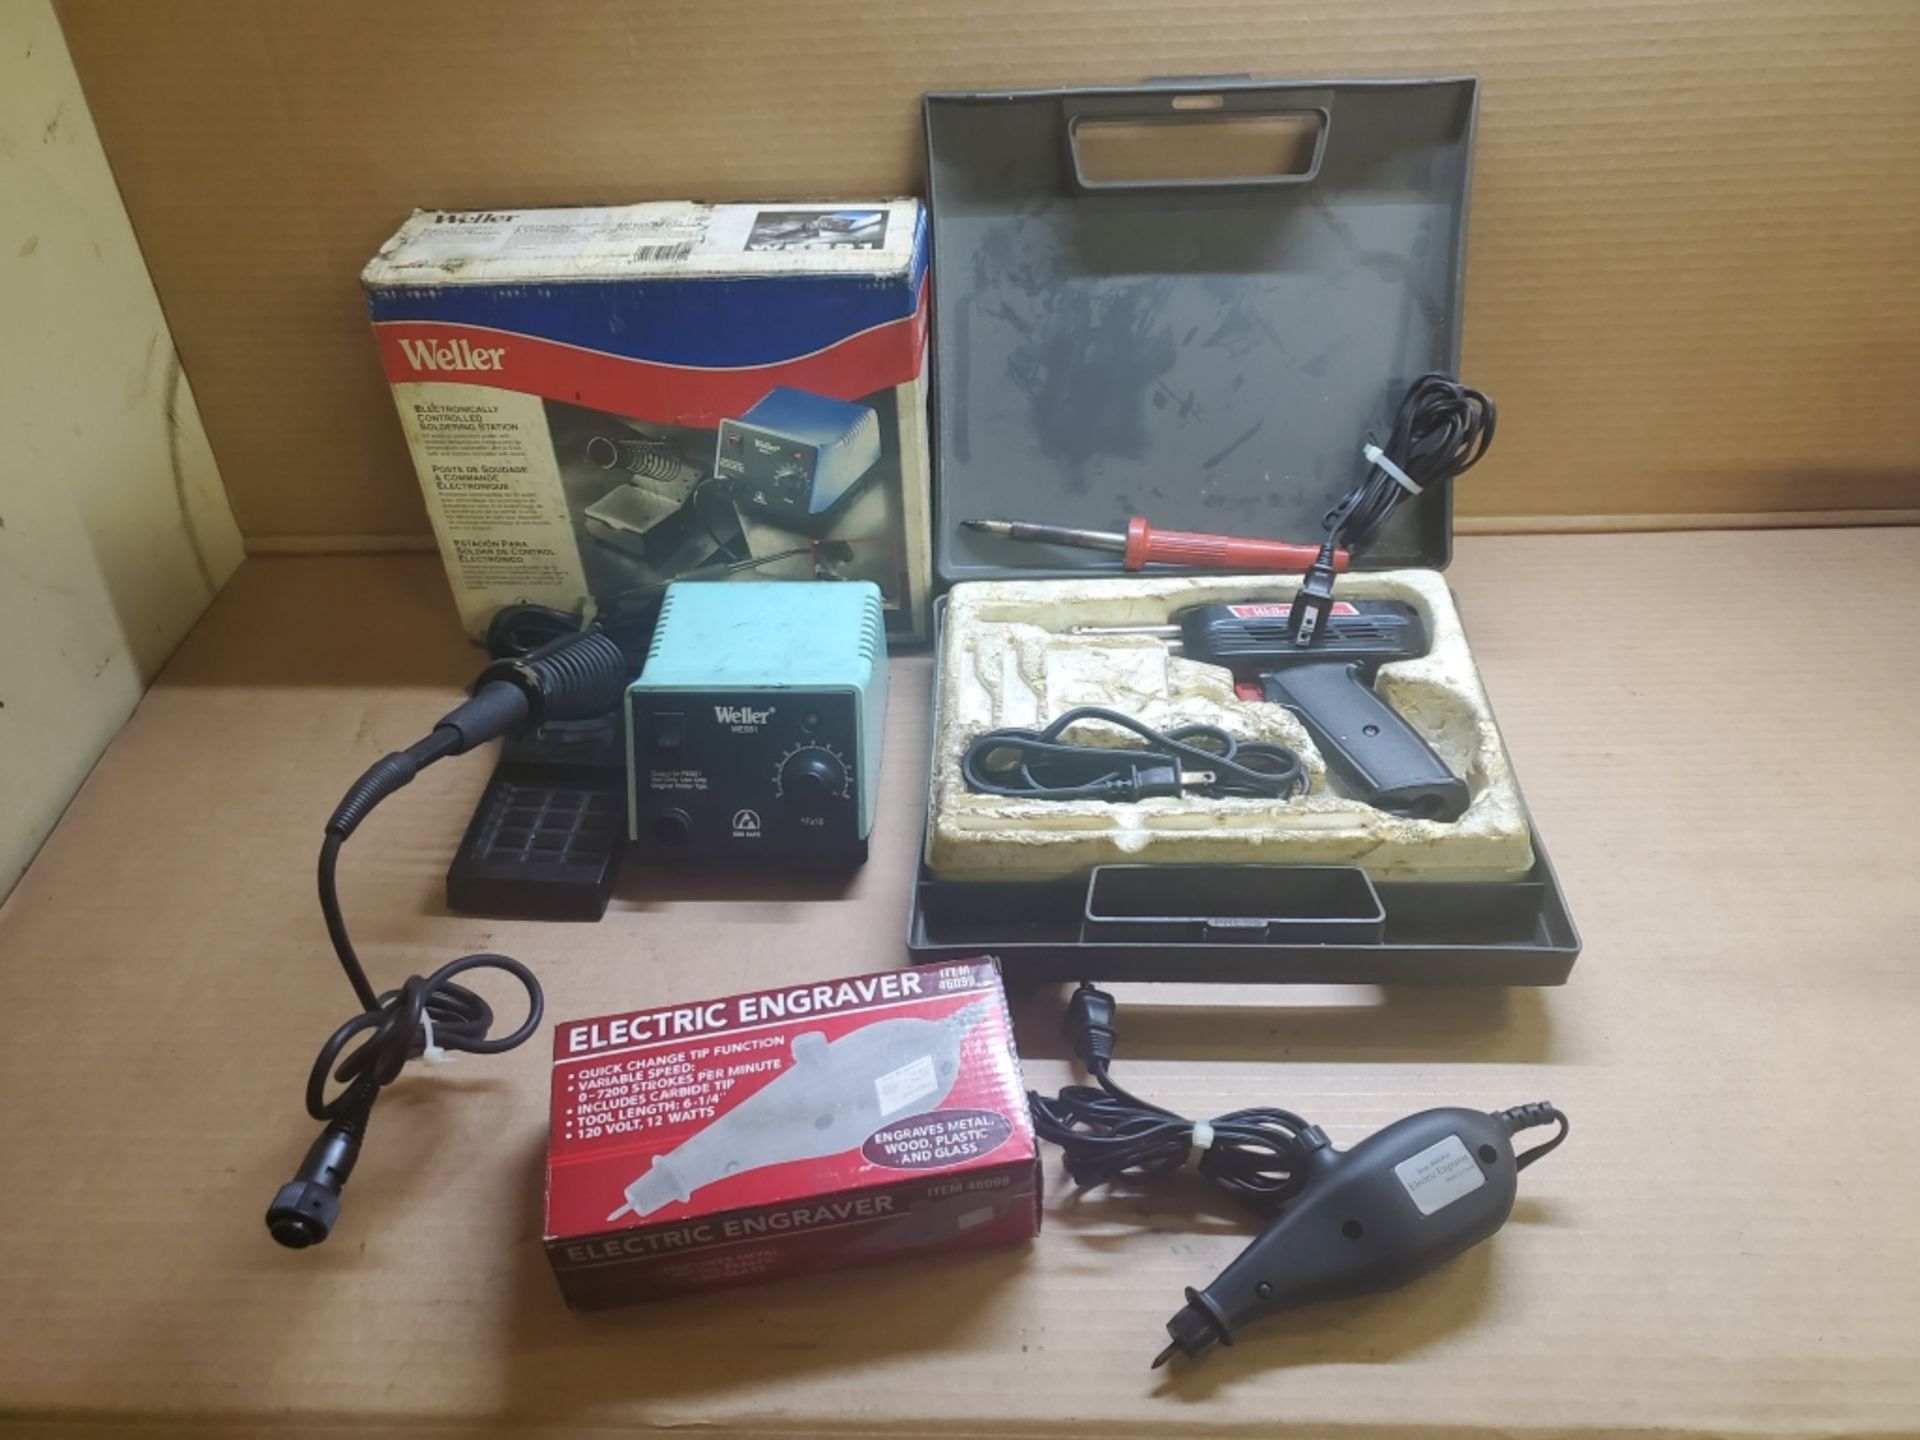 (1) Weller WES51 Soldering Station Soldering Iron, Iron Stand, And Box, (1) Weller 8200 Soldering